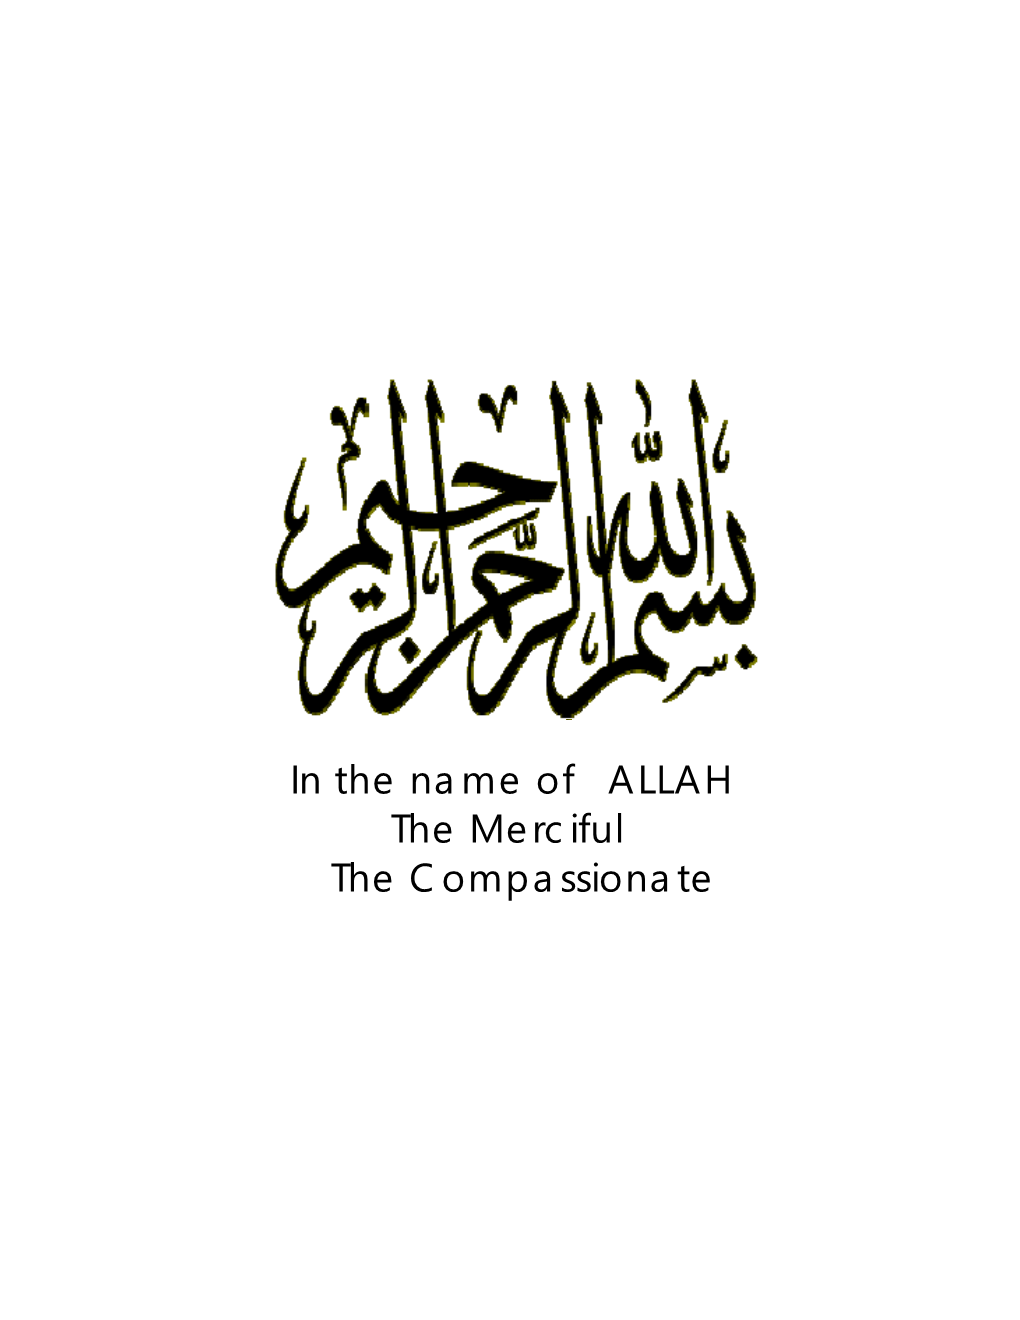 In the Name of ALLAH the Merciful the Compassionate